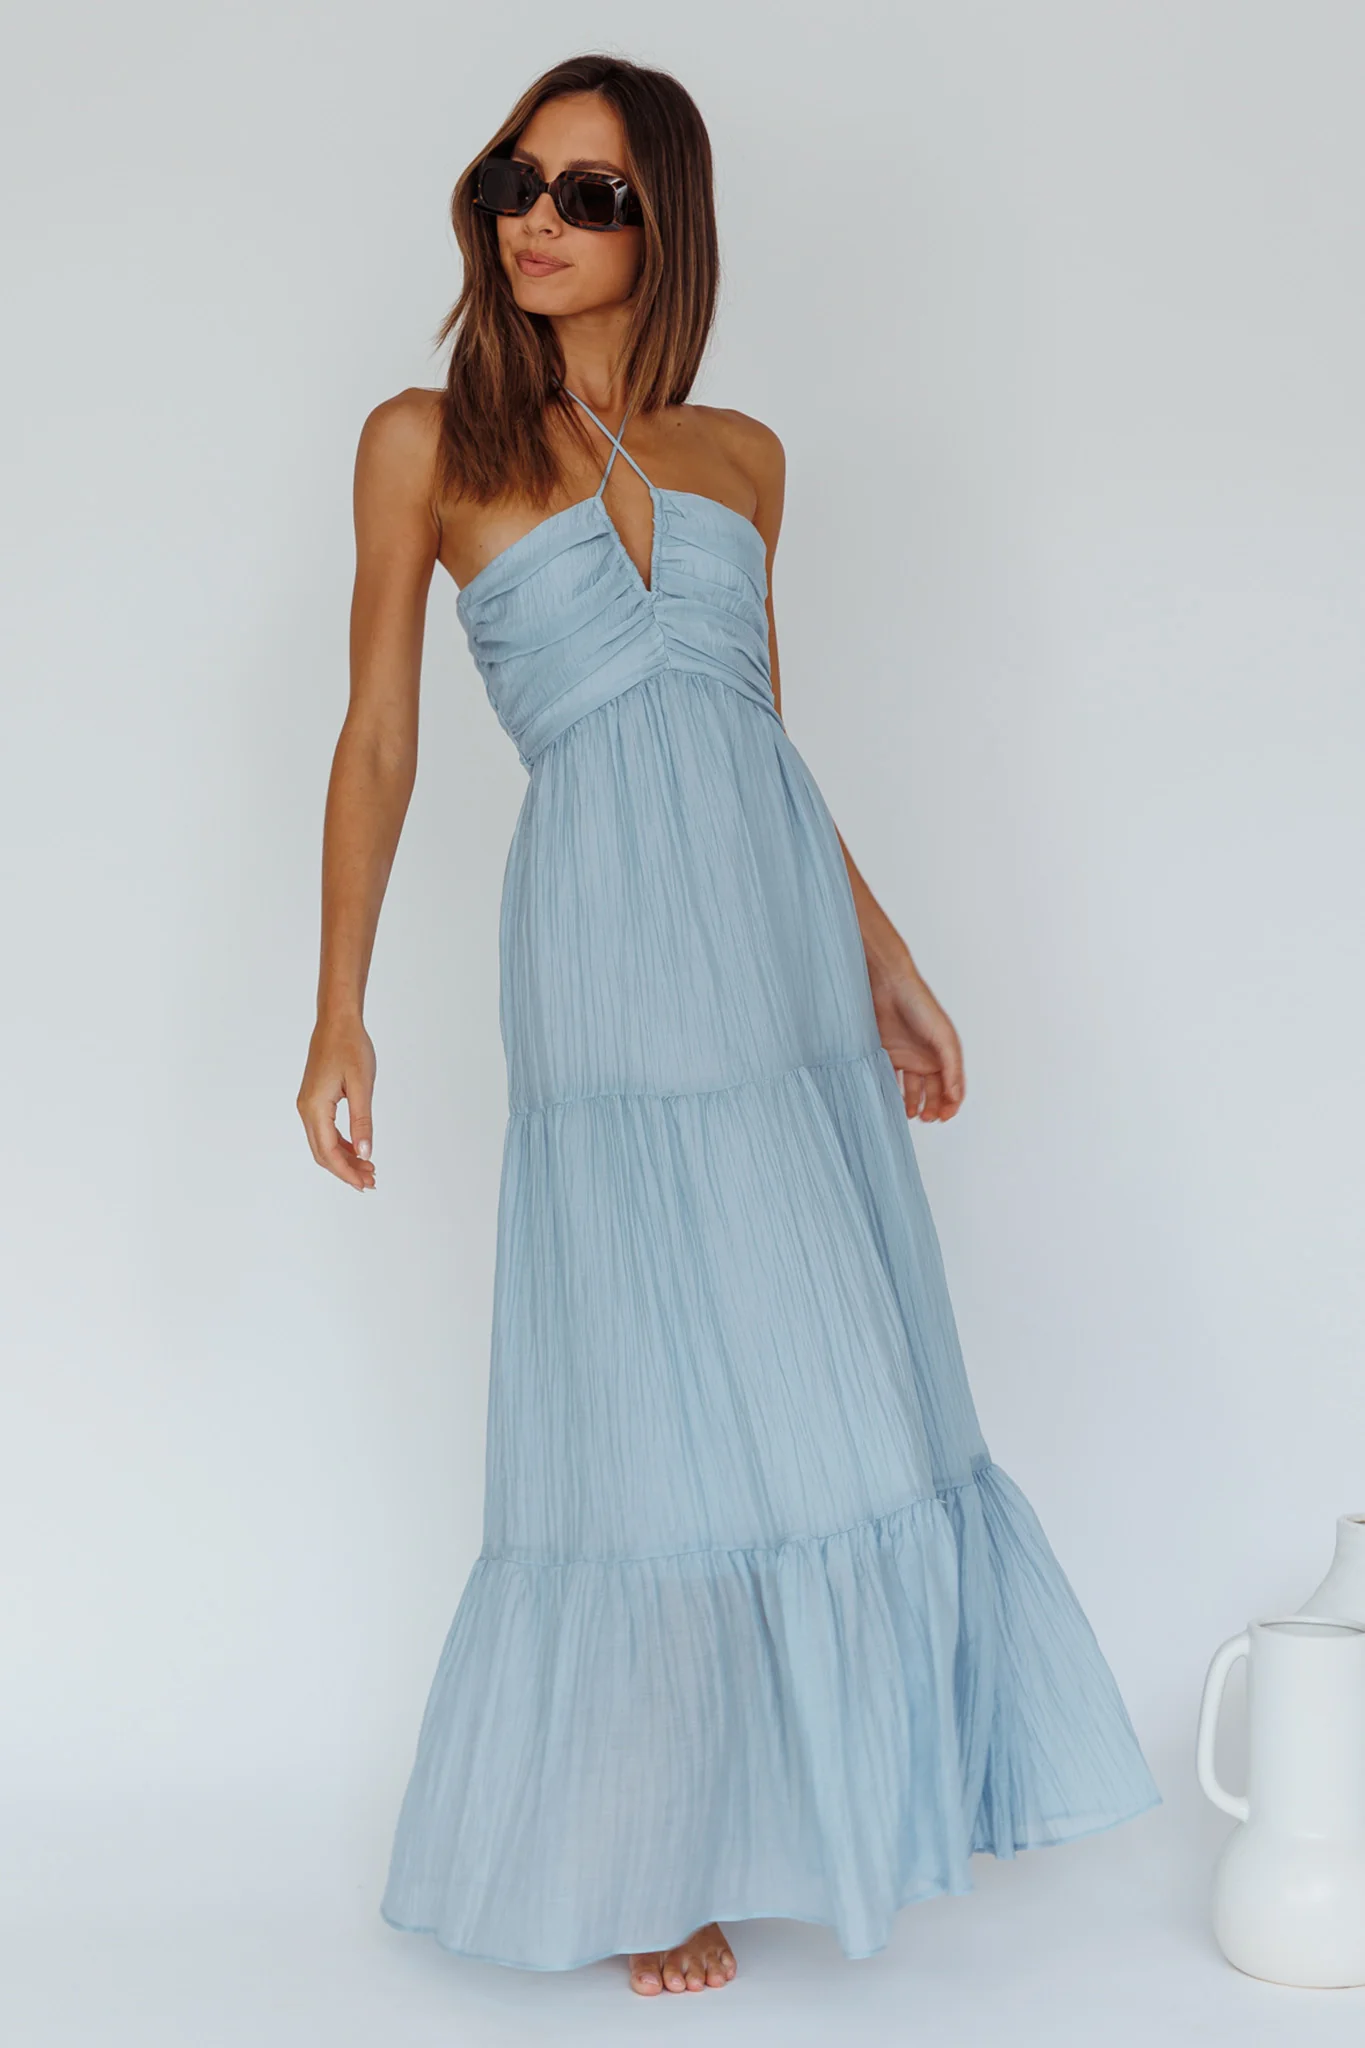 How to Style Light Blue Long Dress: Best 15 Outfit Ideas for Women